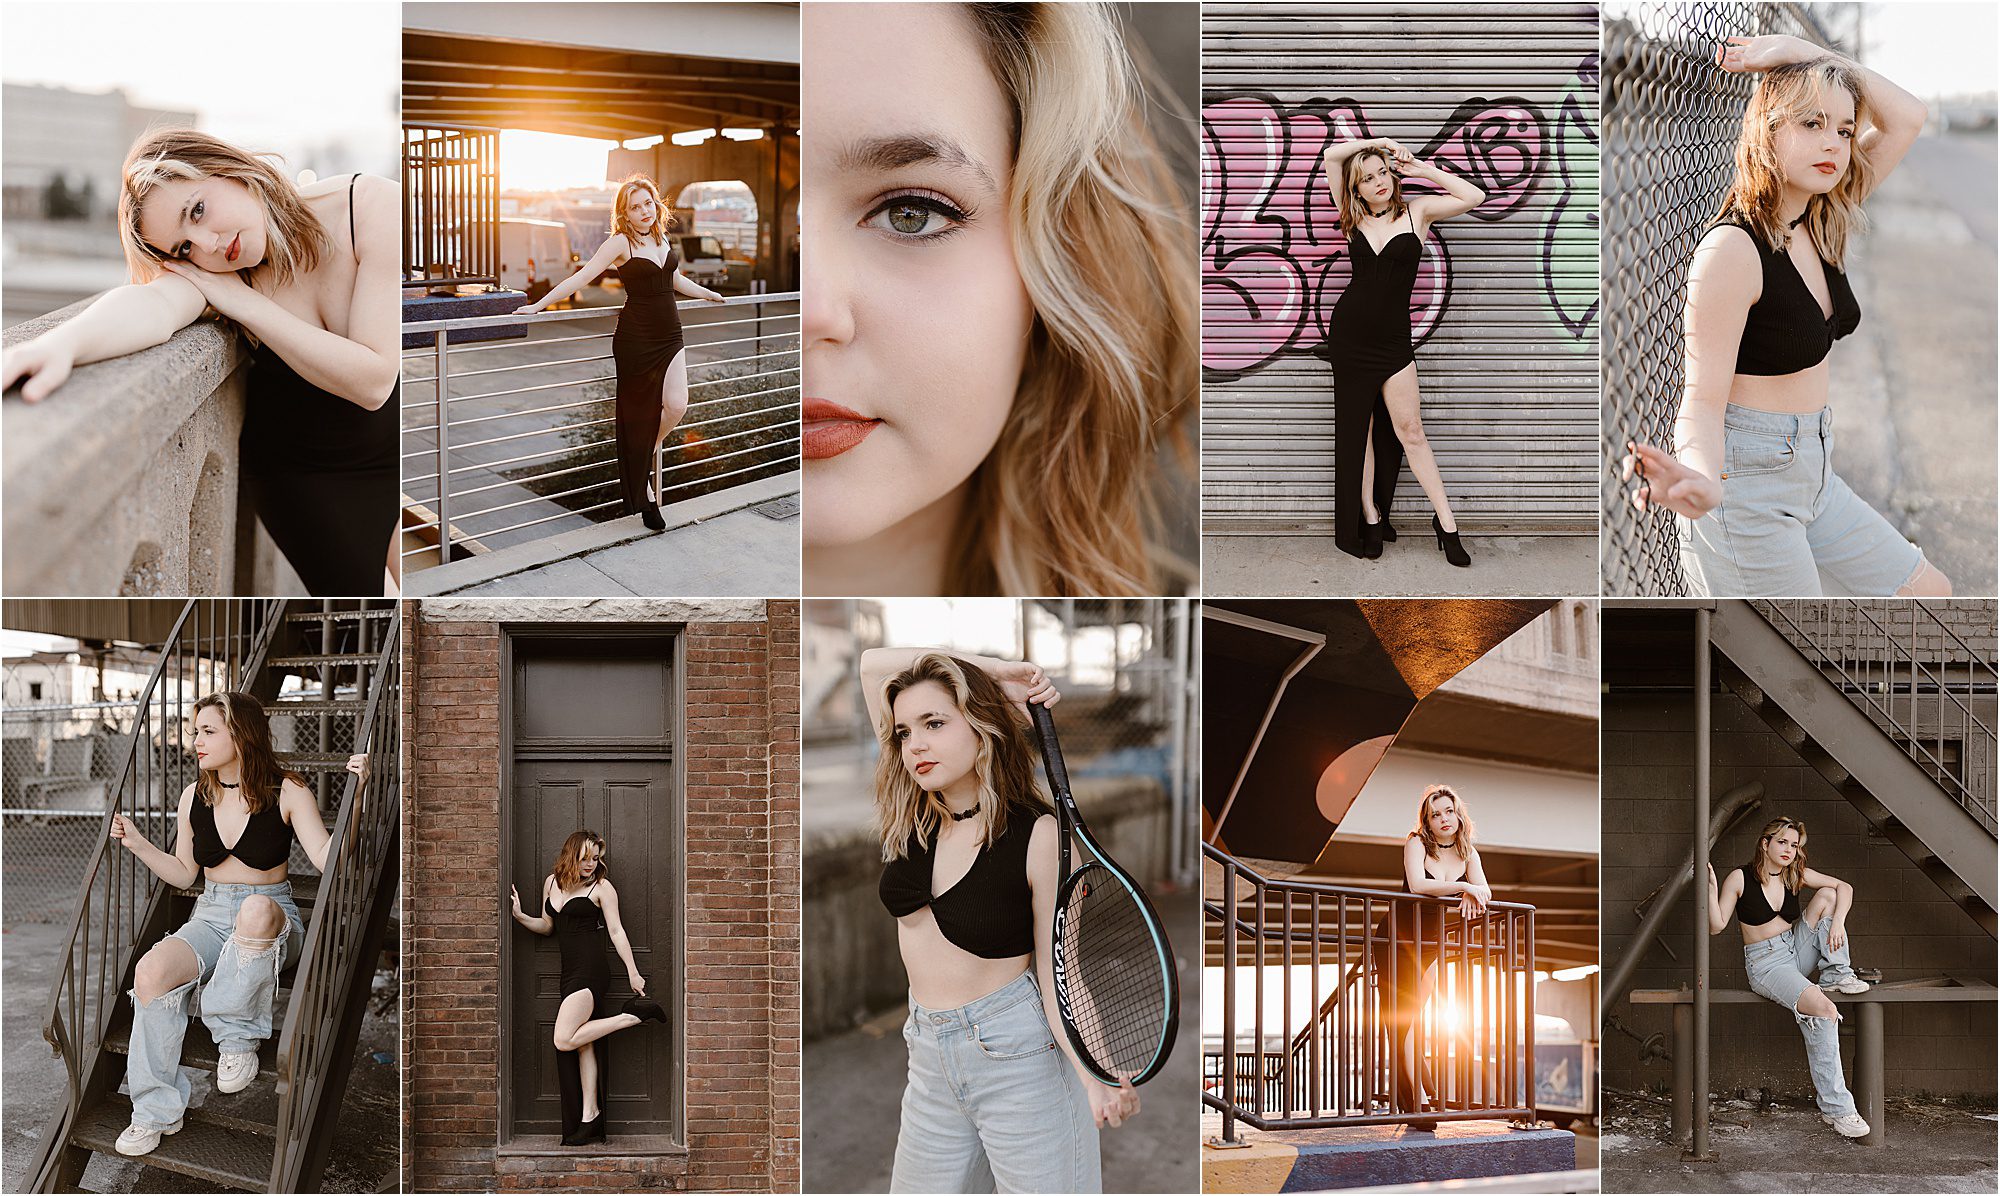 Knoxville Senior Photos in the Old City with Grunge Aesthetics